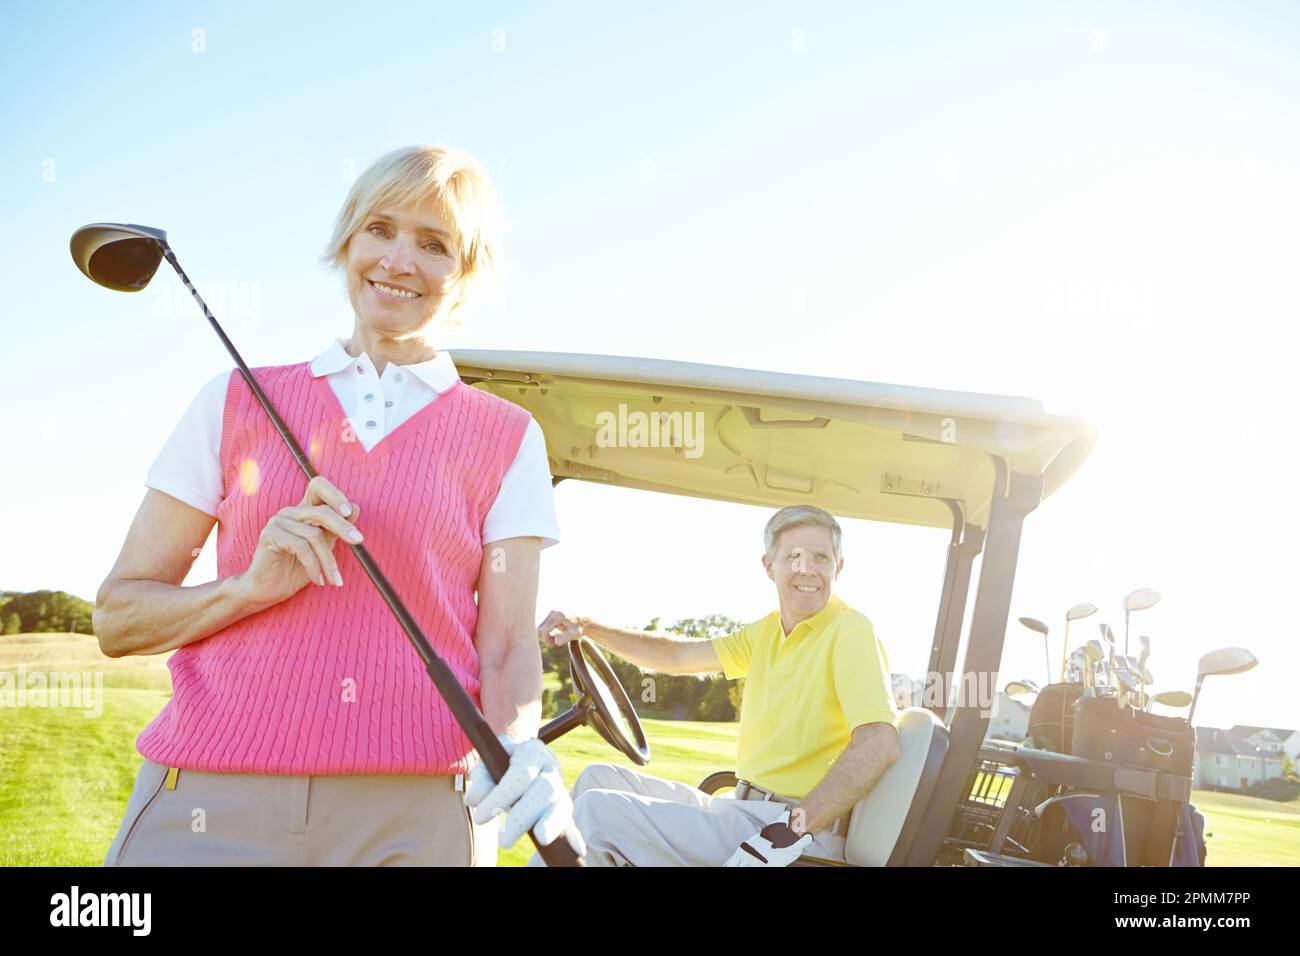 Spot of golf. Low angle shot of an attractive older female golfer standing in front of a golf cart with her golfing buddy behind the wheel. Stock Photo